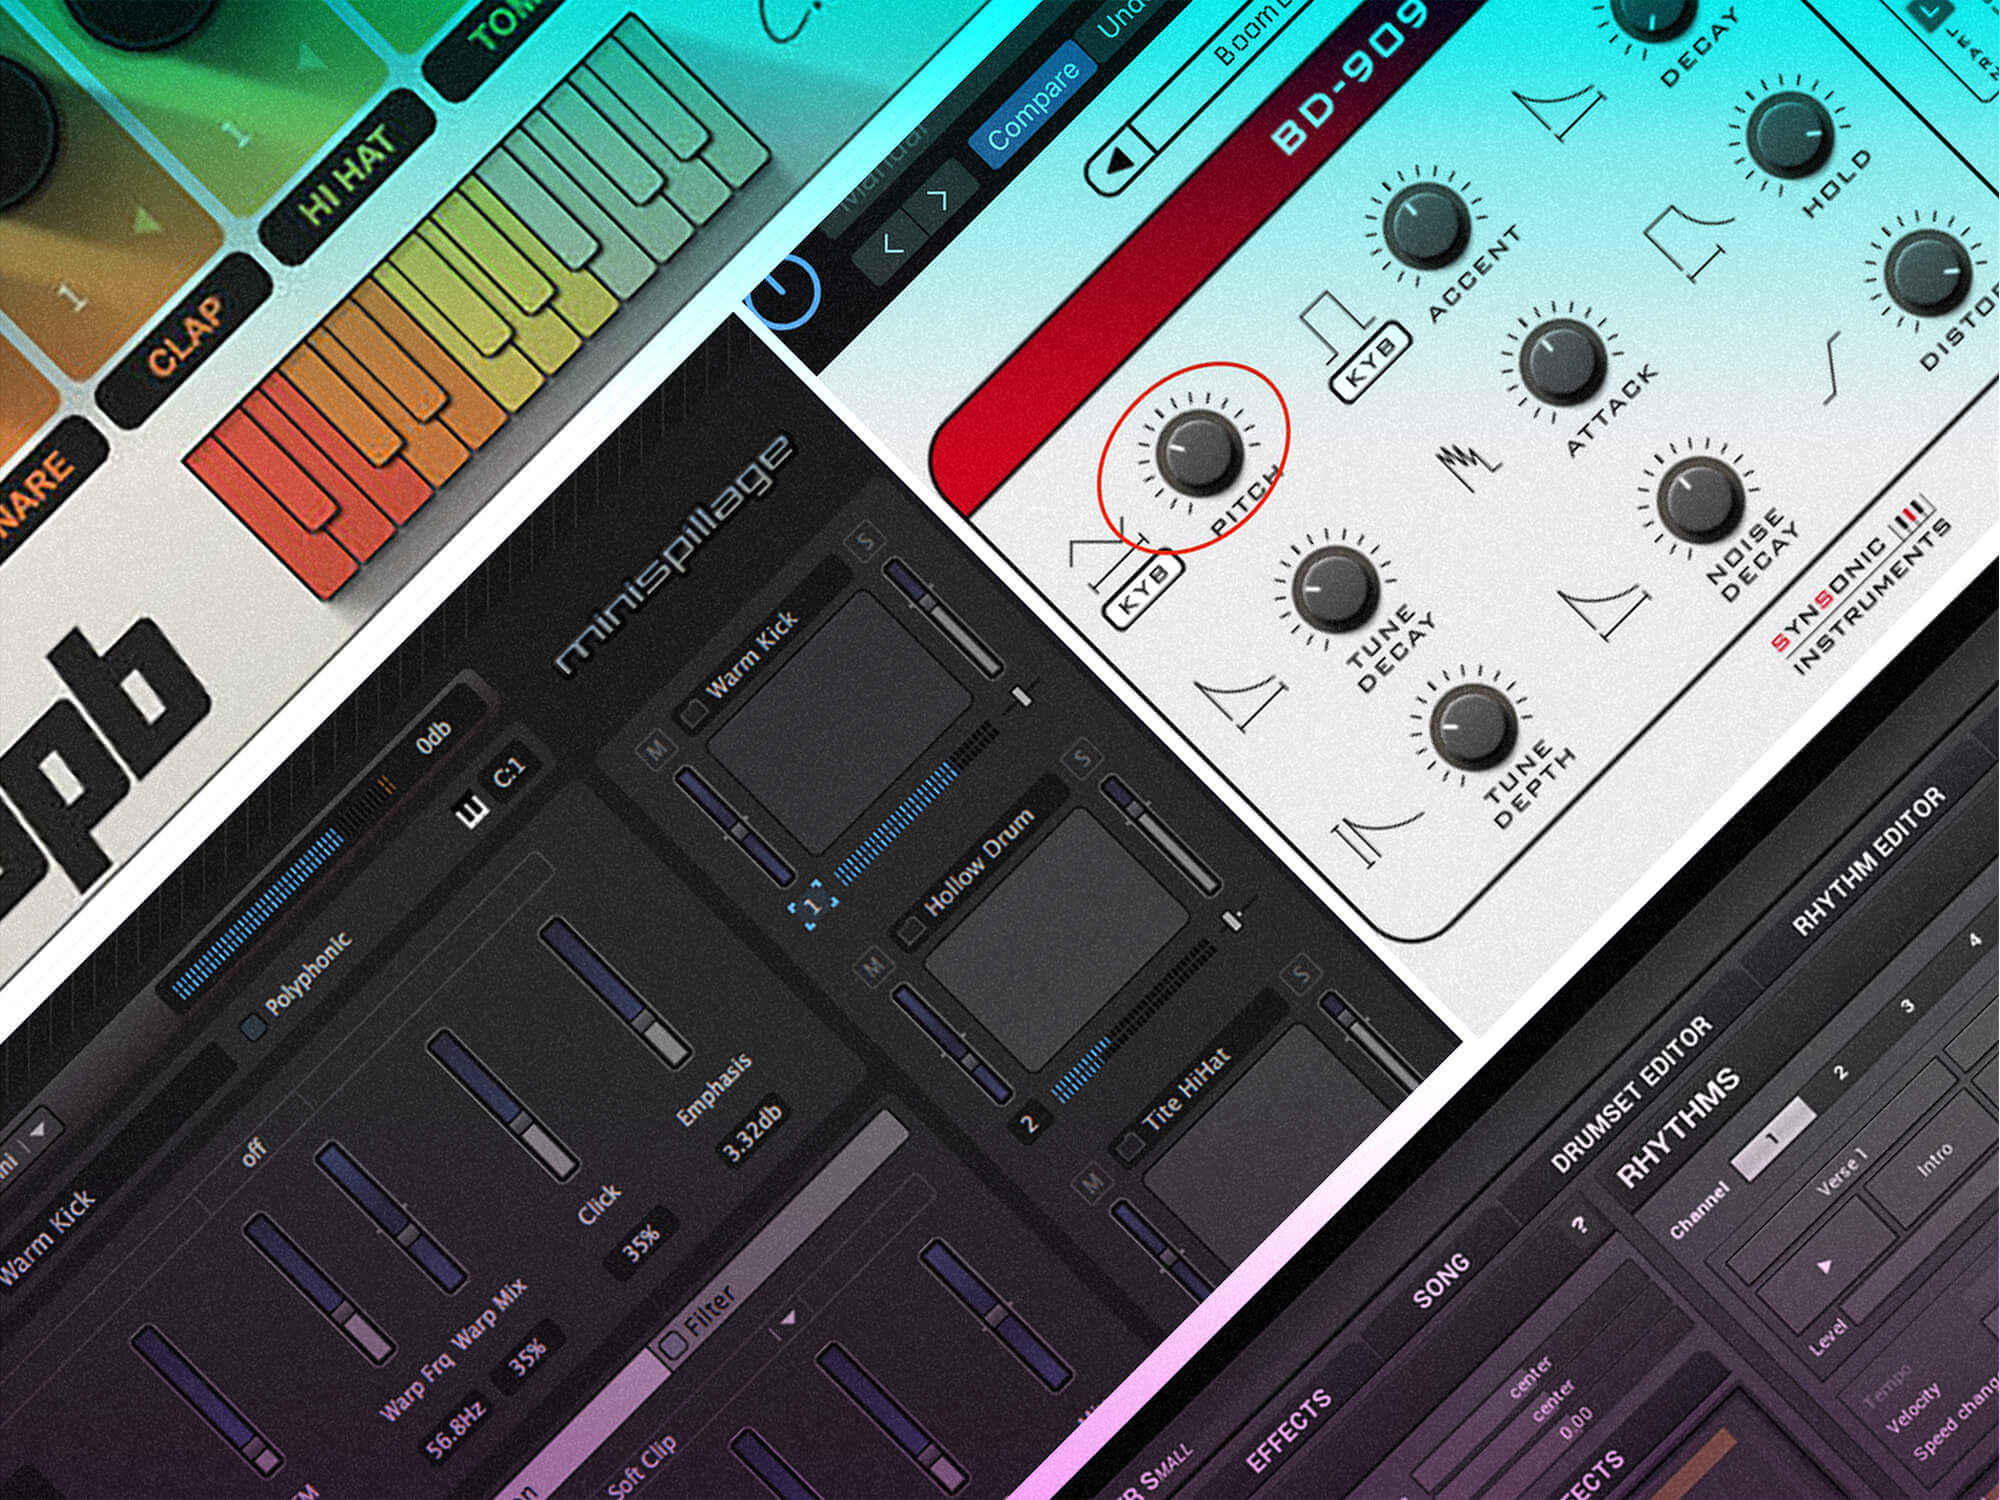 Best freeware instruments in 2022: Six of the best free drum machines